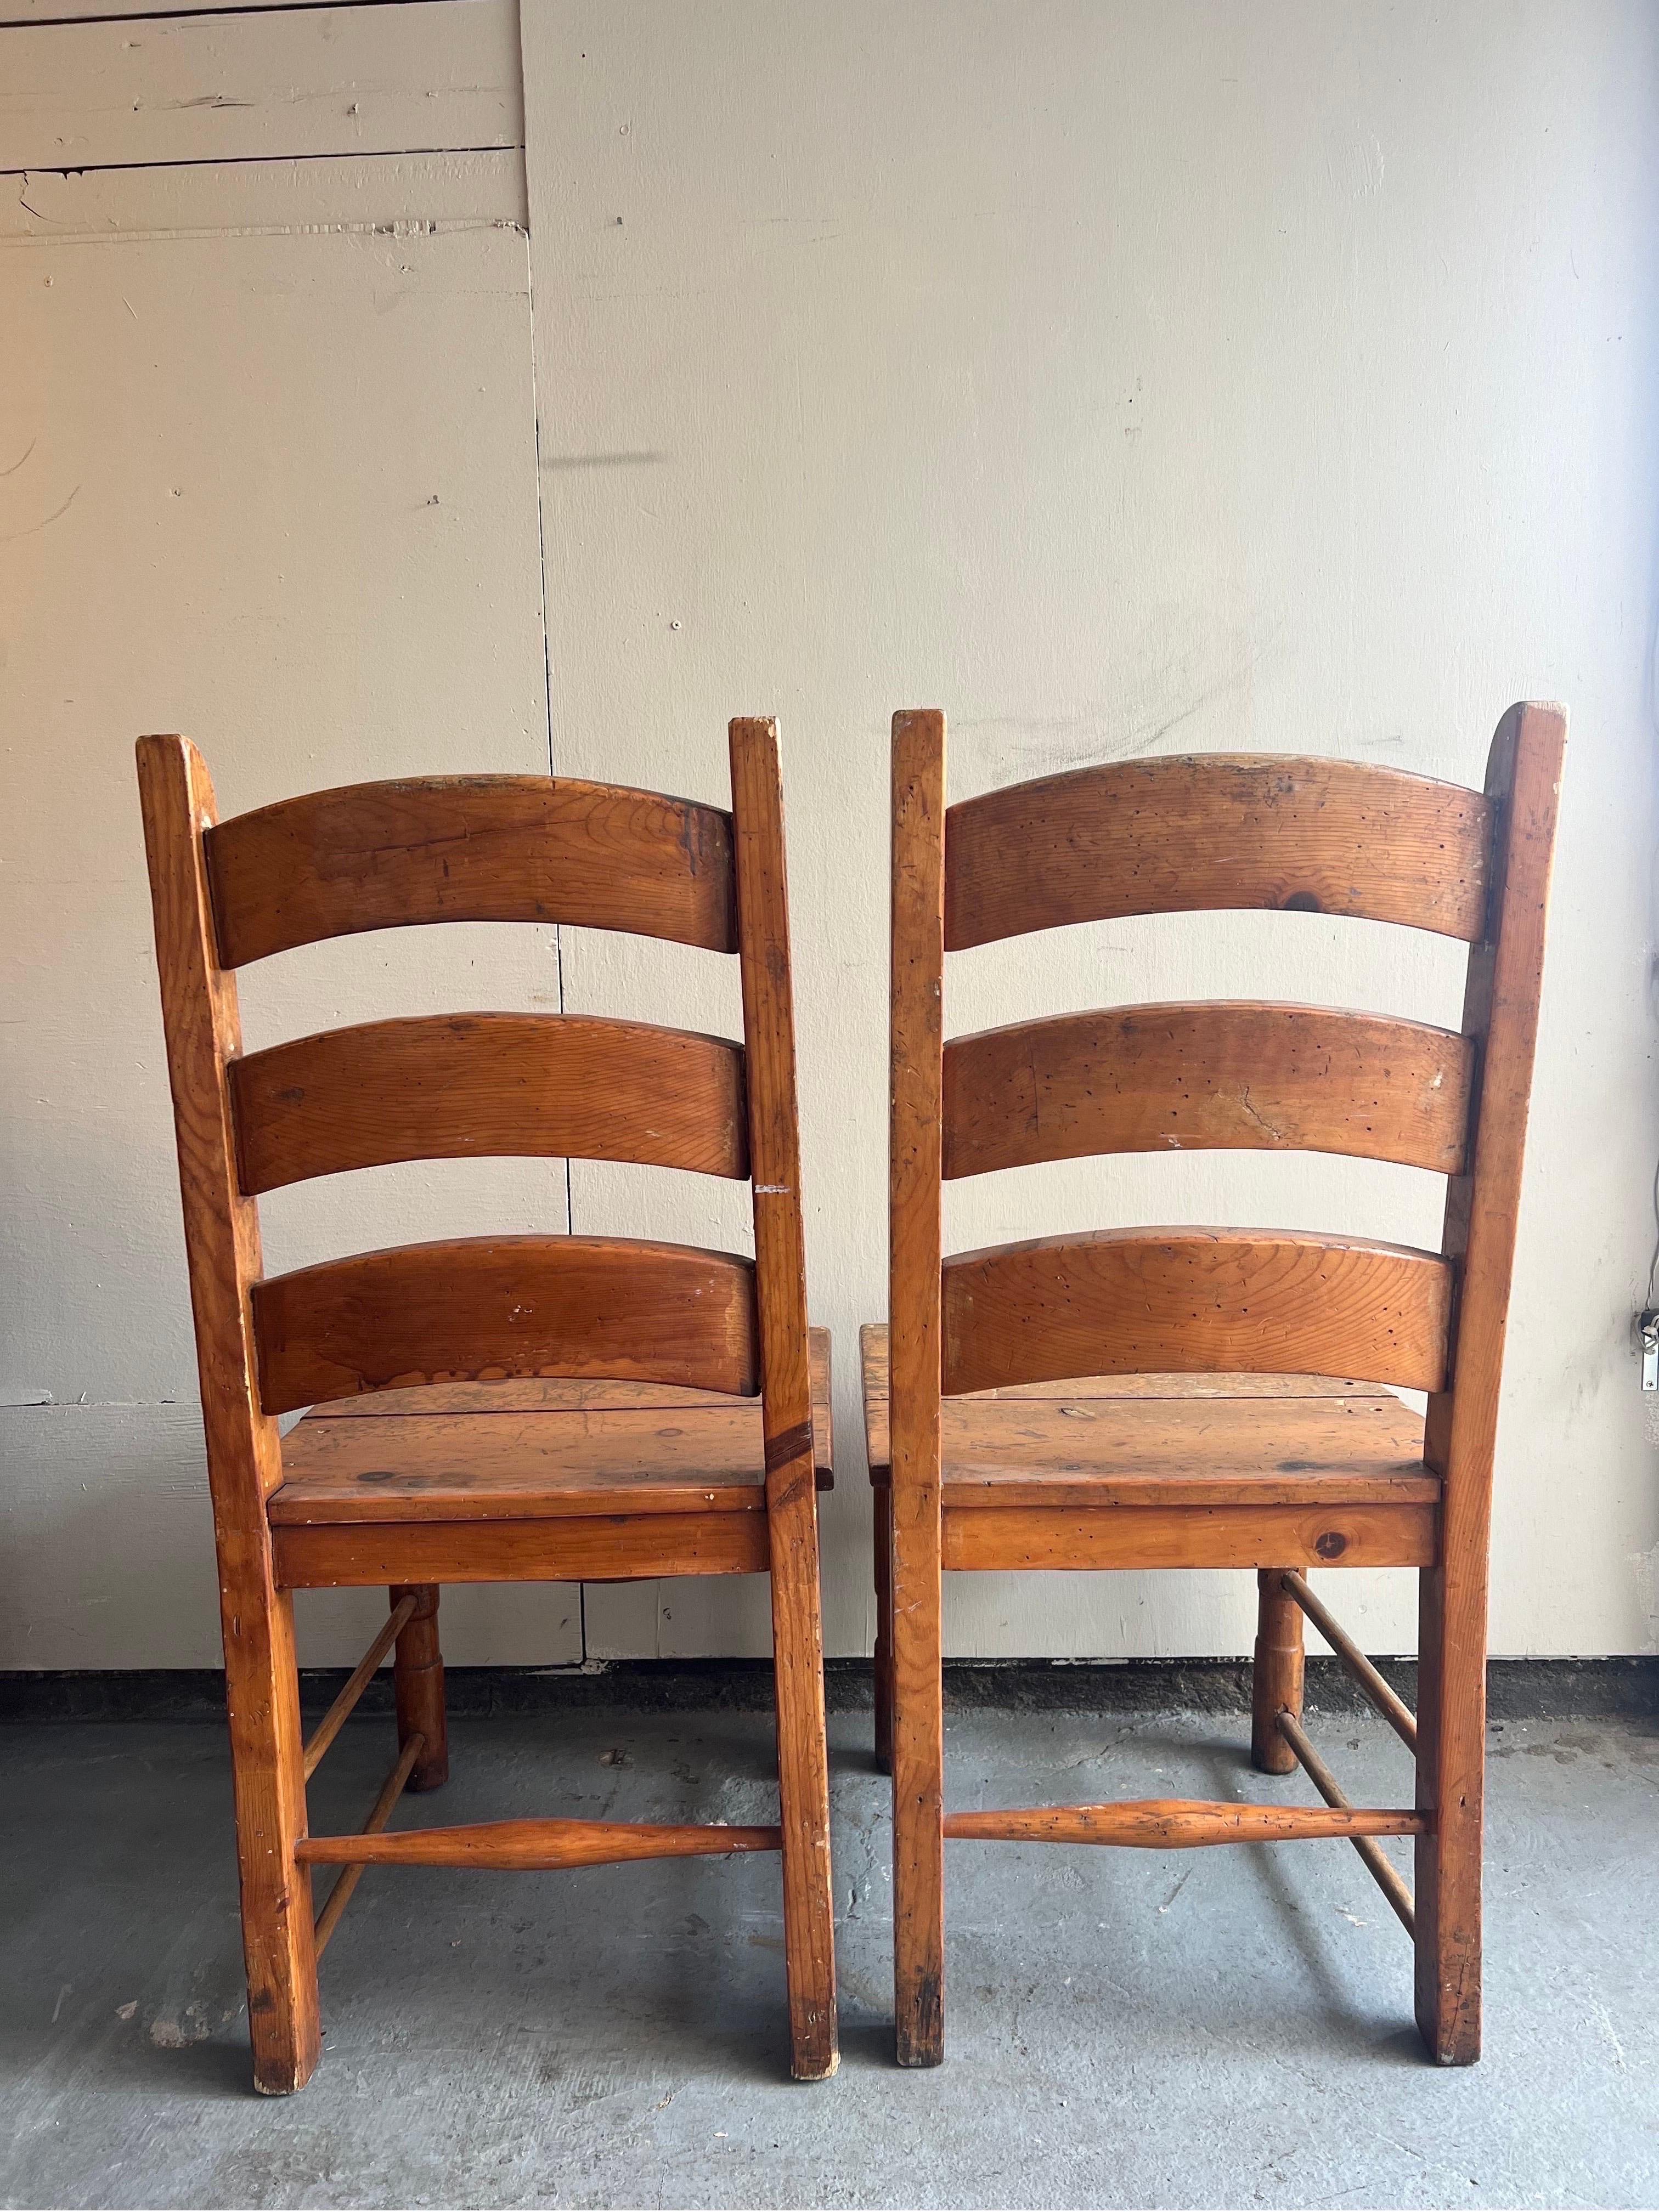 Rustic Pair of Early 20th Century Antique French Country Style Chairs